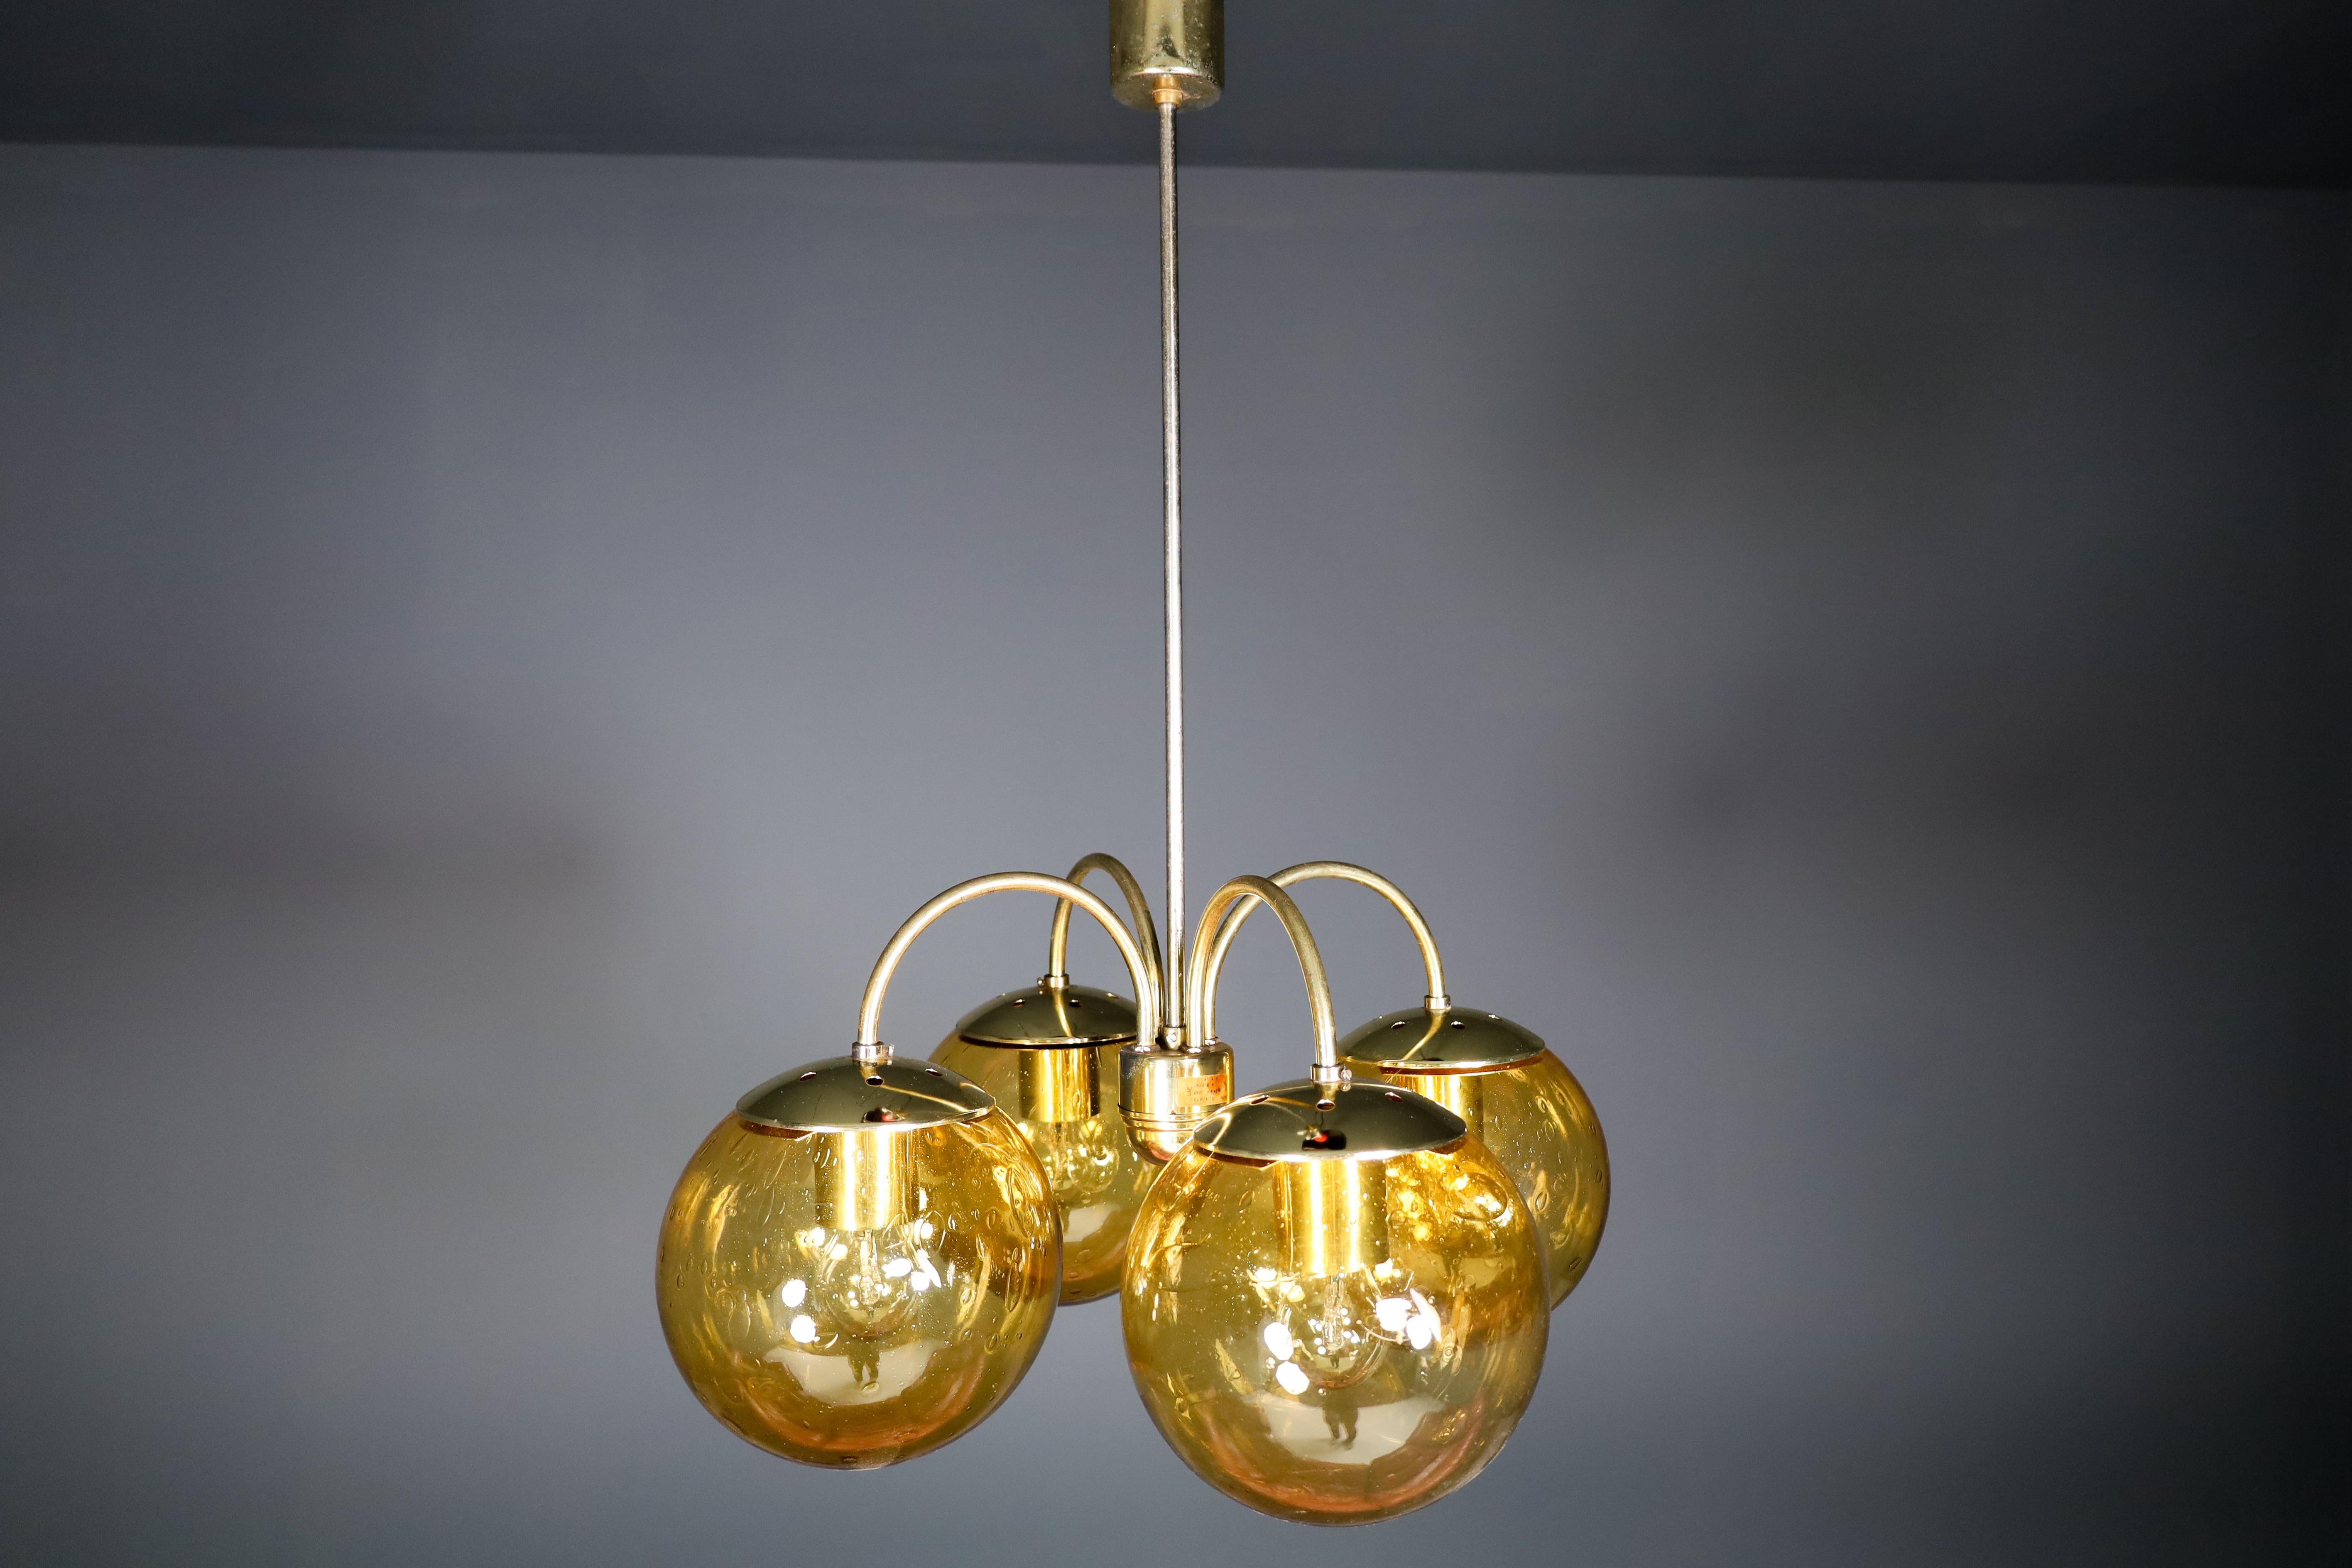 Czech Large Chandelier in Amber Hand Blown Colored Glass Globes & Brass, Europe, 1970s For Sale